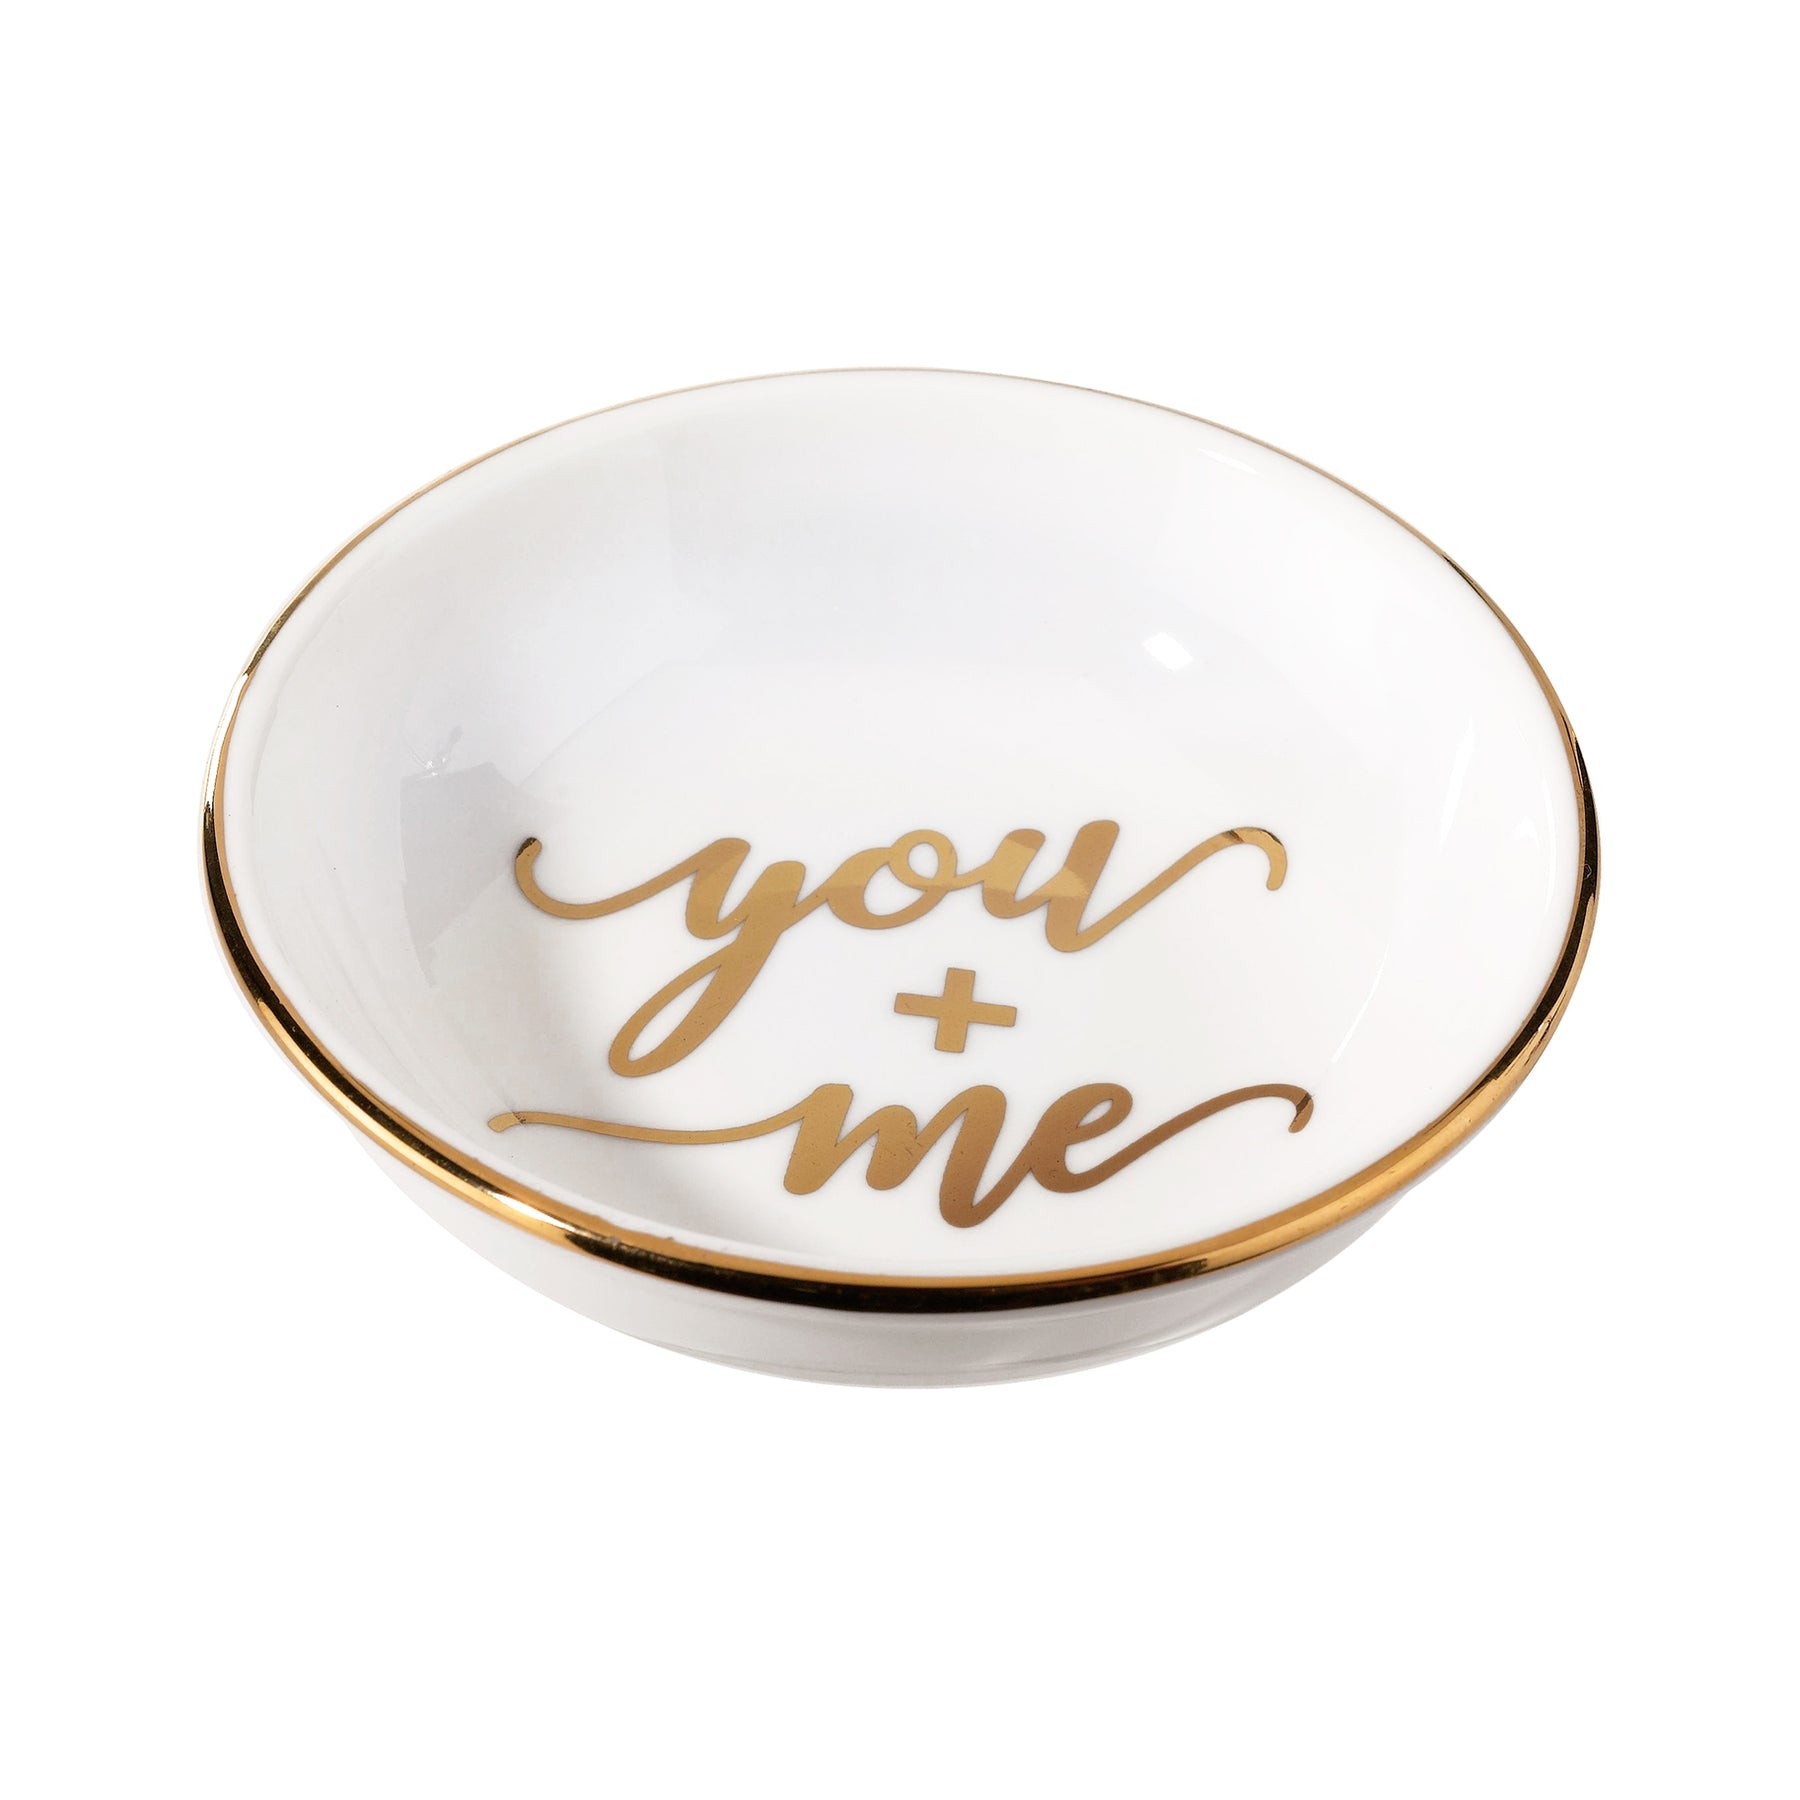 YOU AND ME CERAMIC RING DISH | Wedding Ring Dish for one or two rings - Minter and Richter Designs